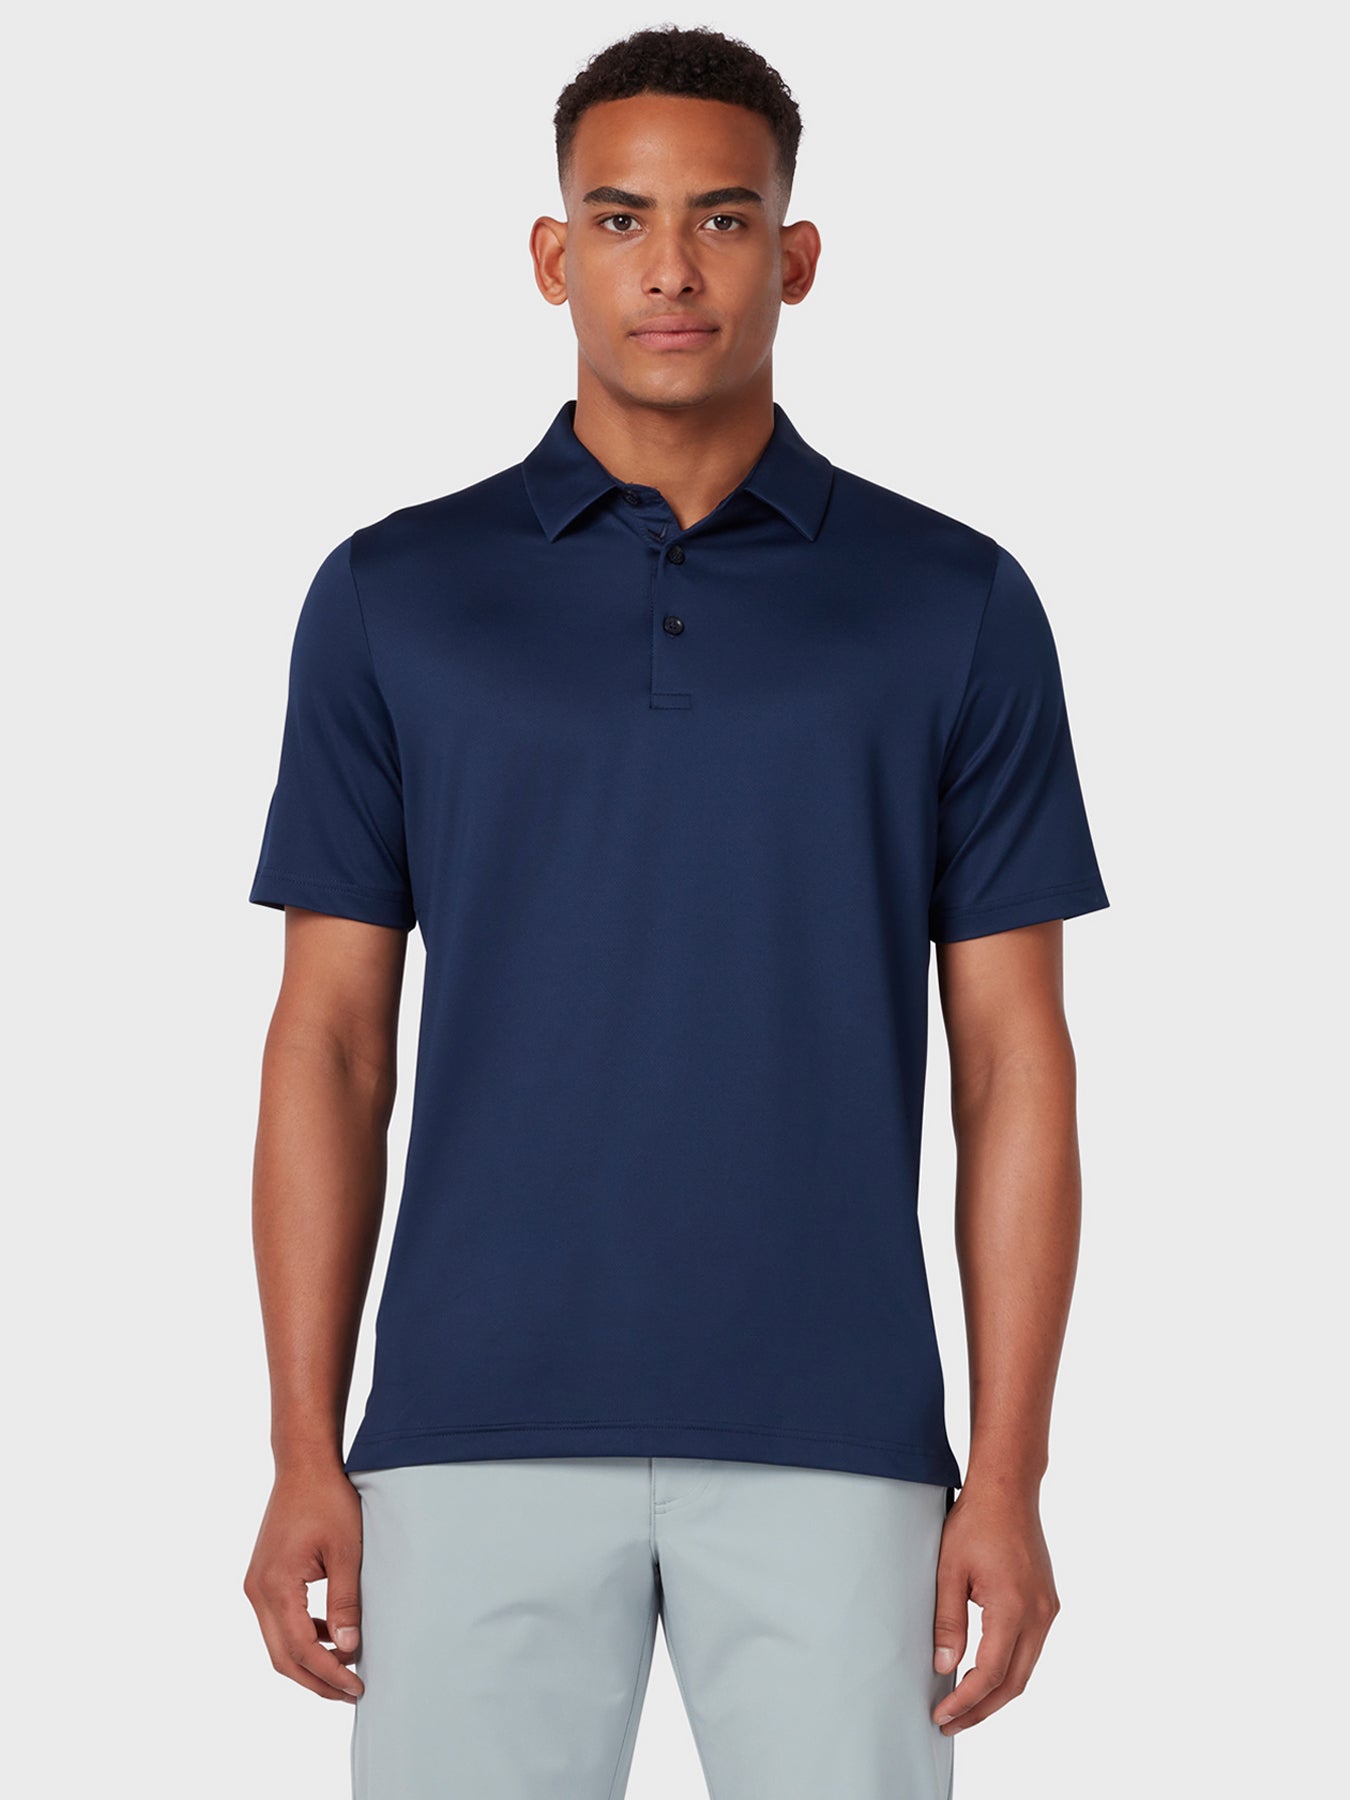 View Swing Tech Tour Polo In Peacoat Peacoat XL information